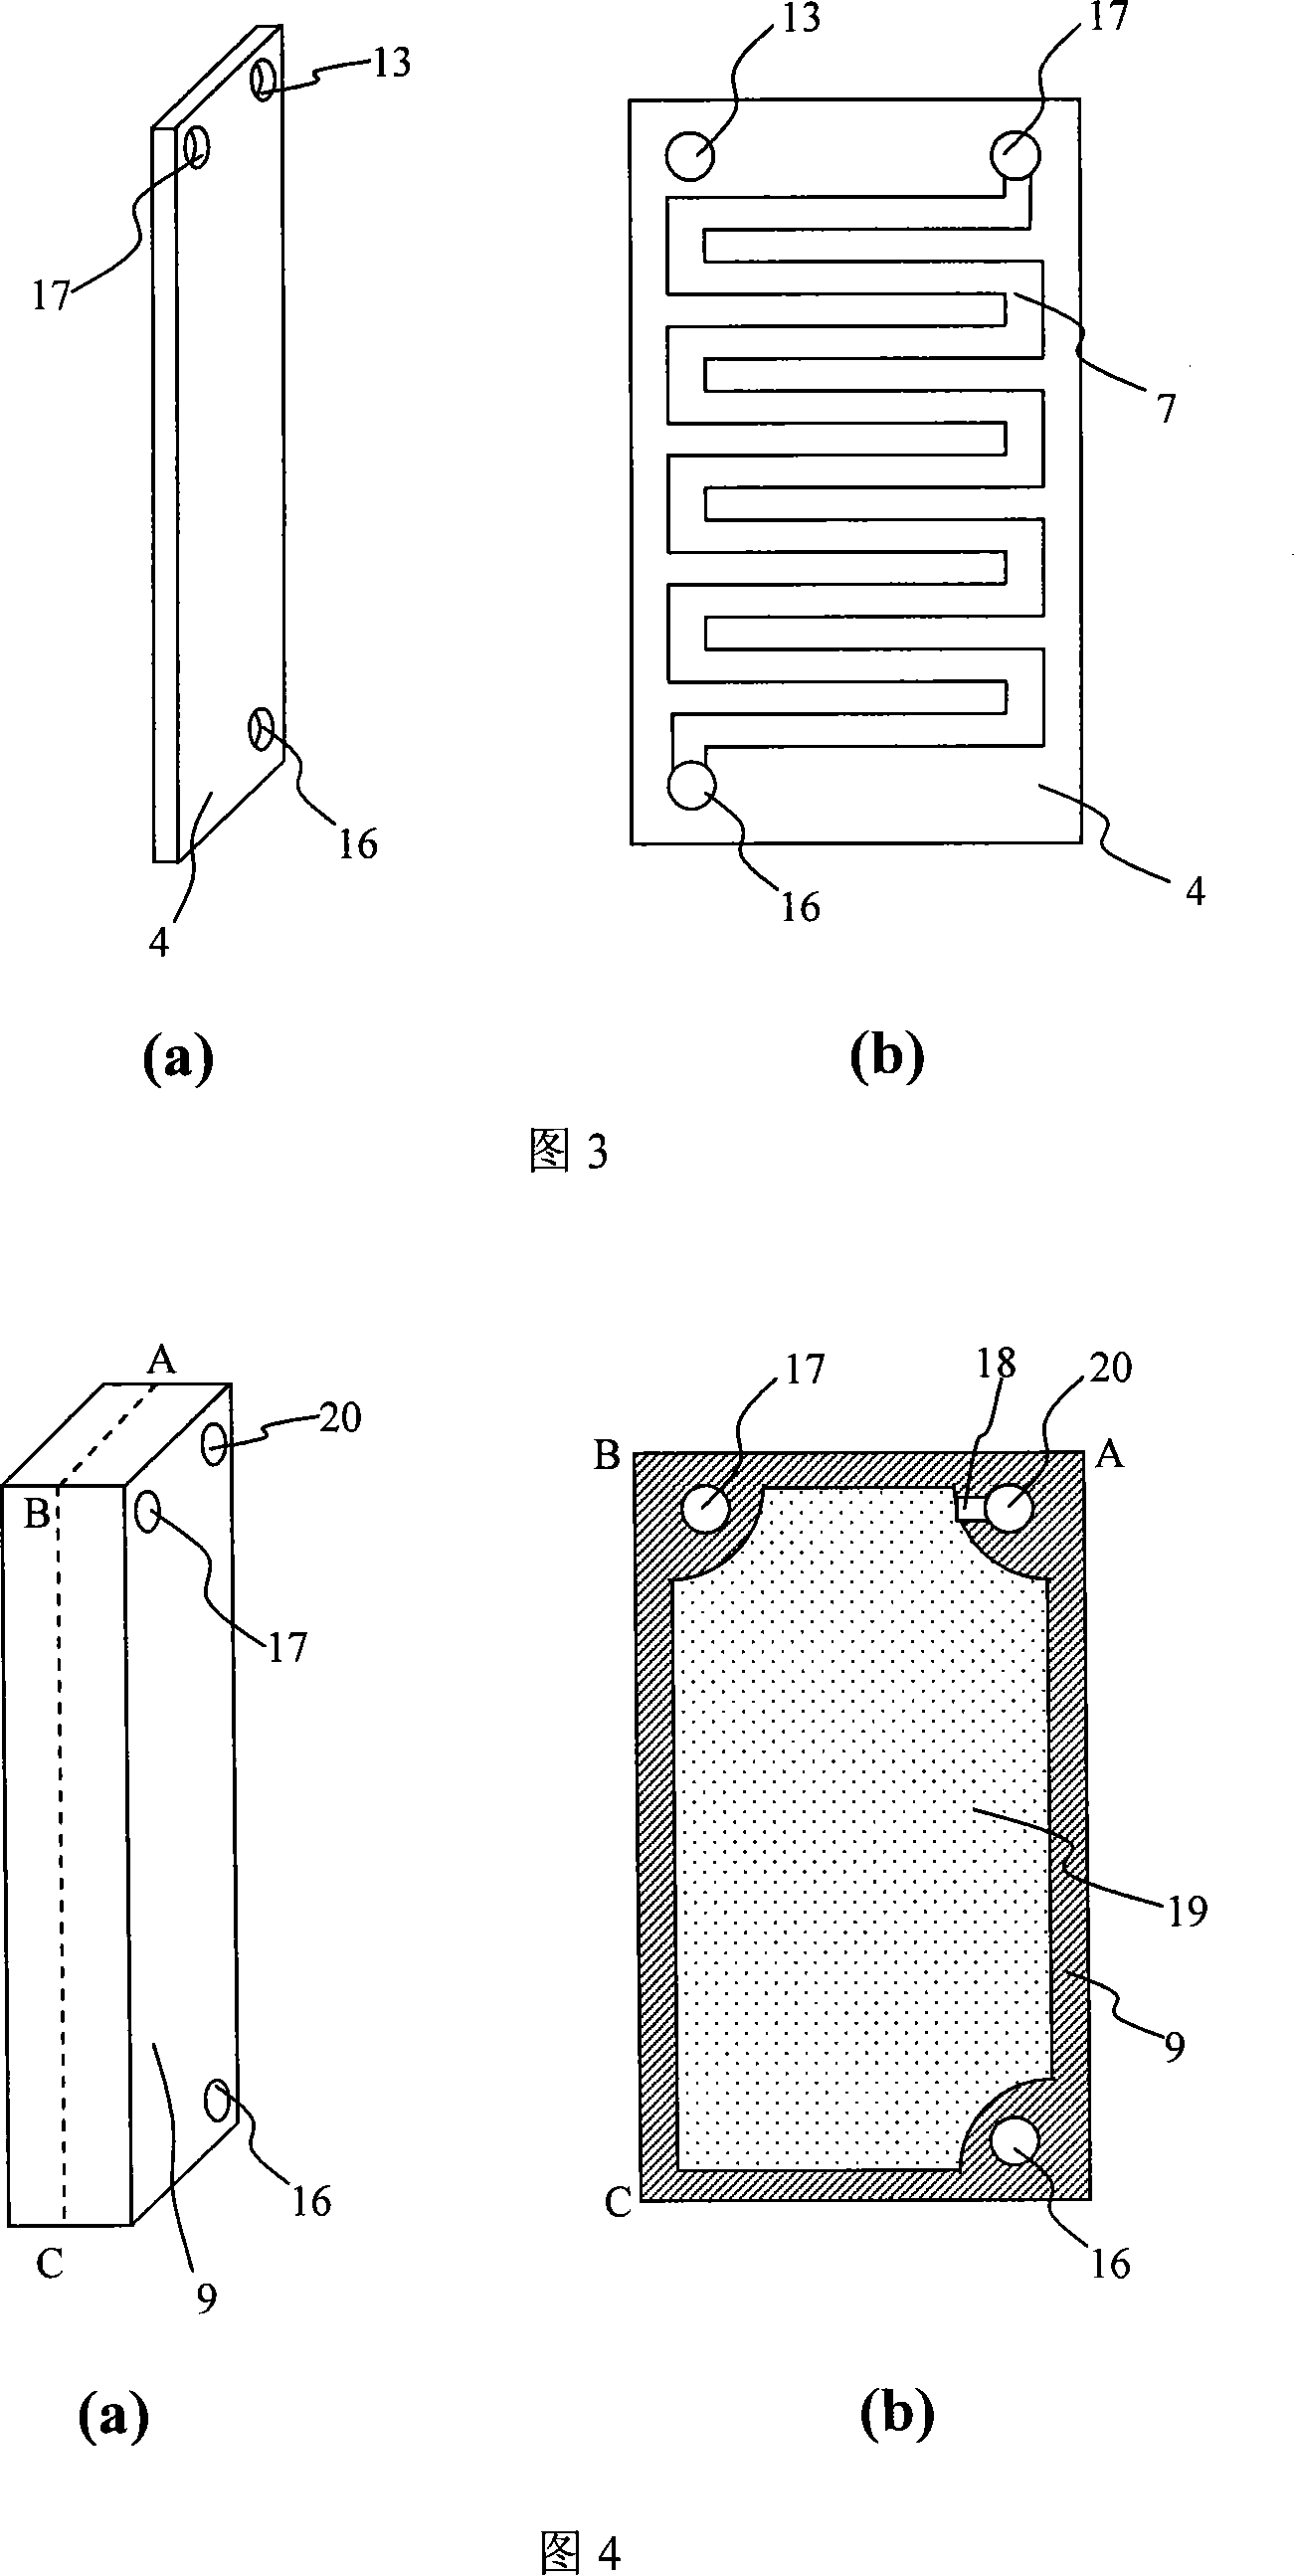 Fuel cell coupling with hydrogen storing unit